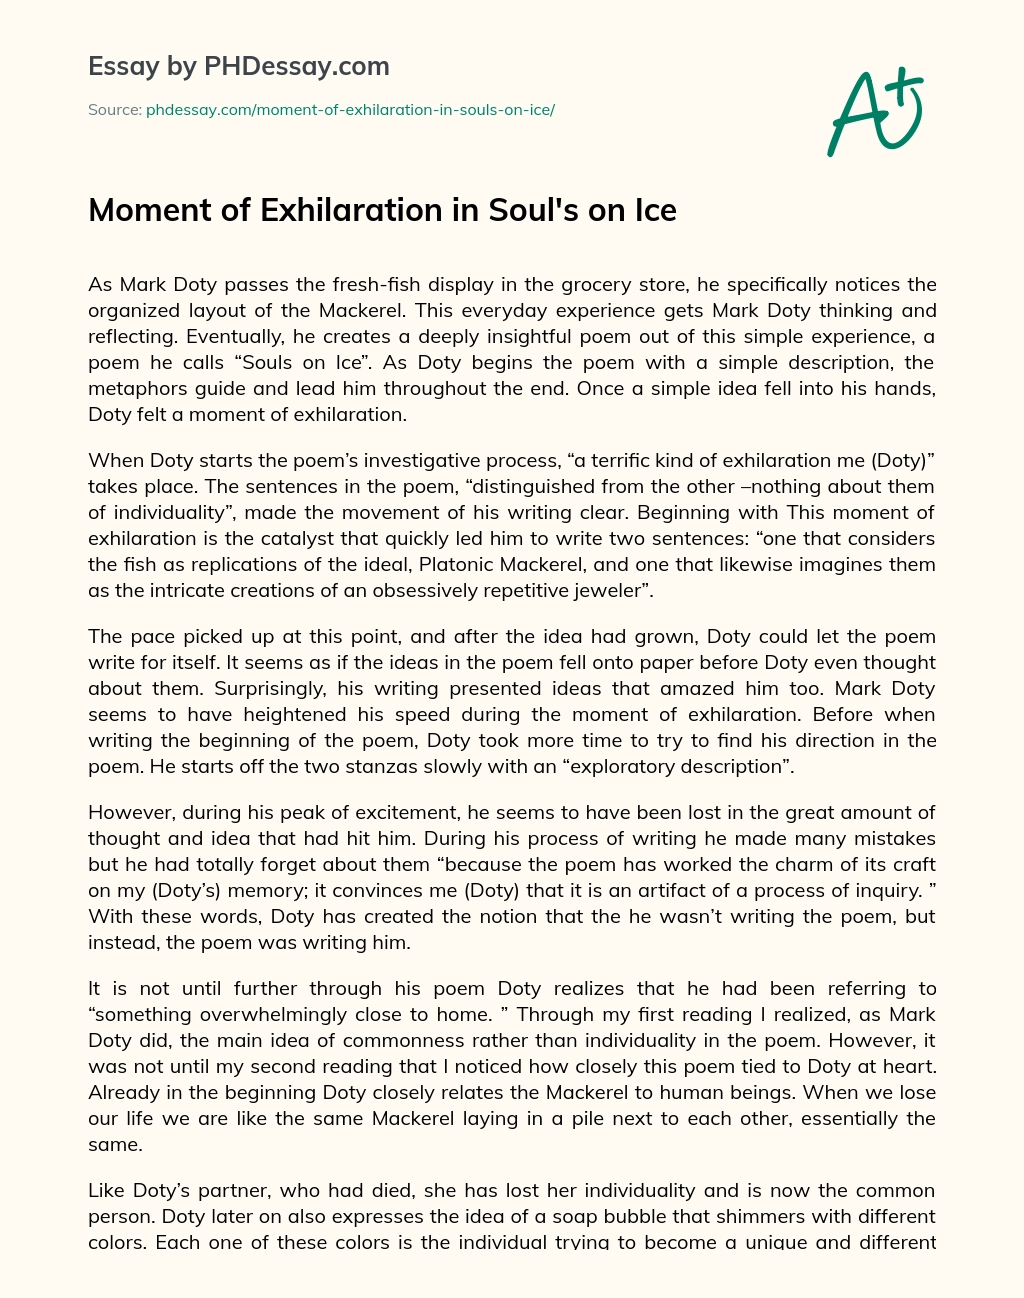 Moment of Exhilaration in Soul’s on Ice essay